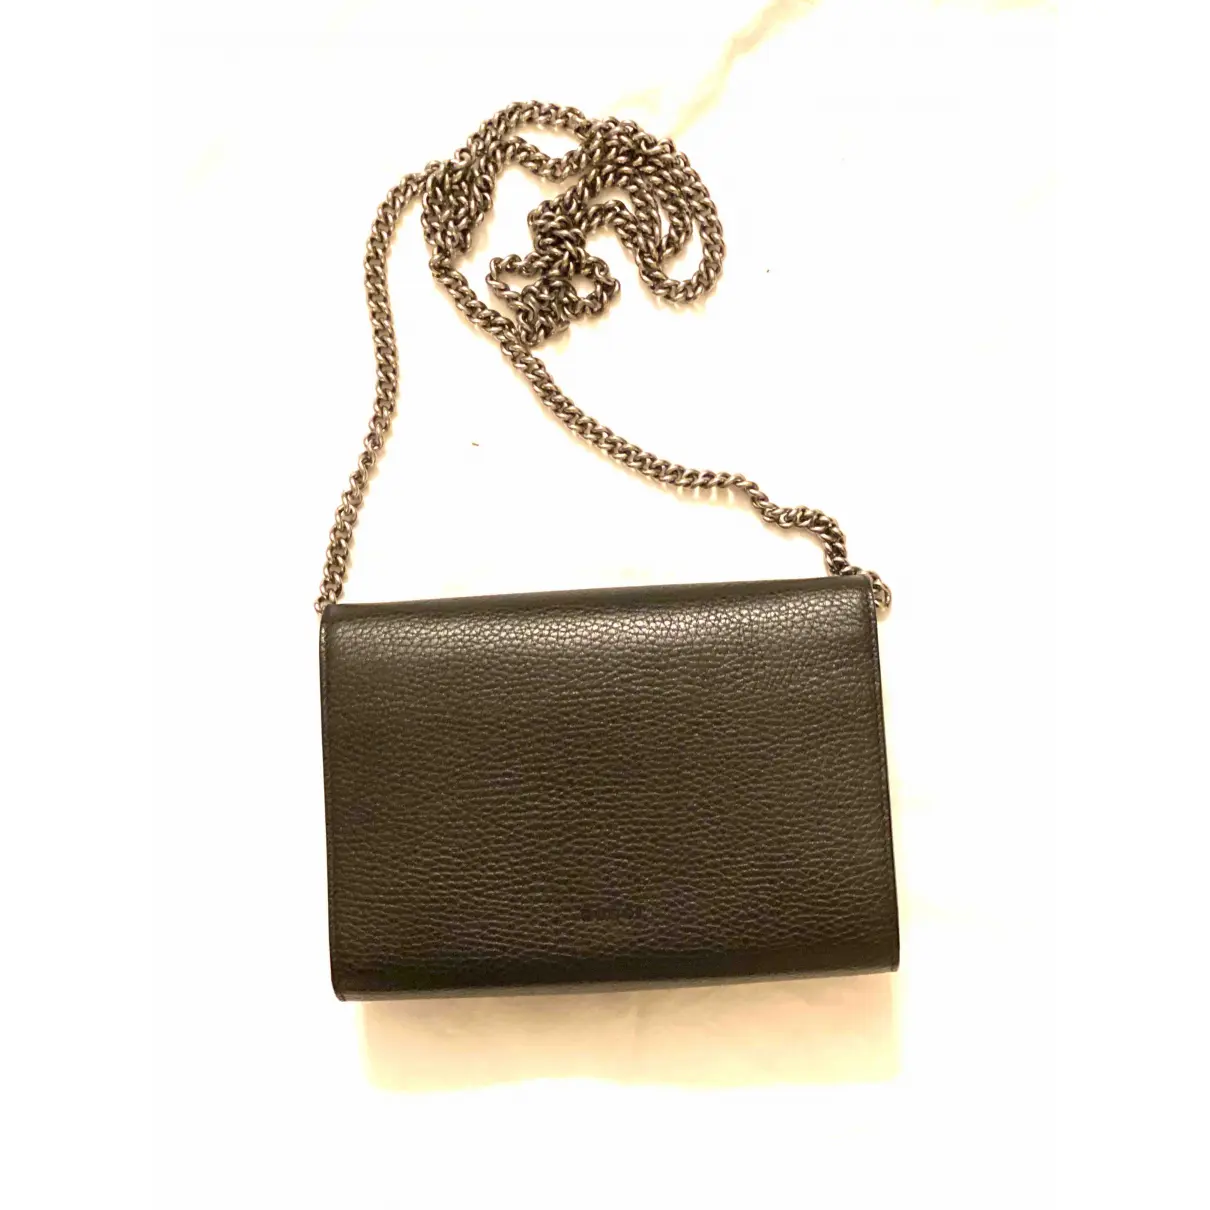 Buy Gucci Dionysus Chain Wallet leather crossbody bag online